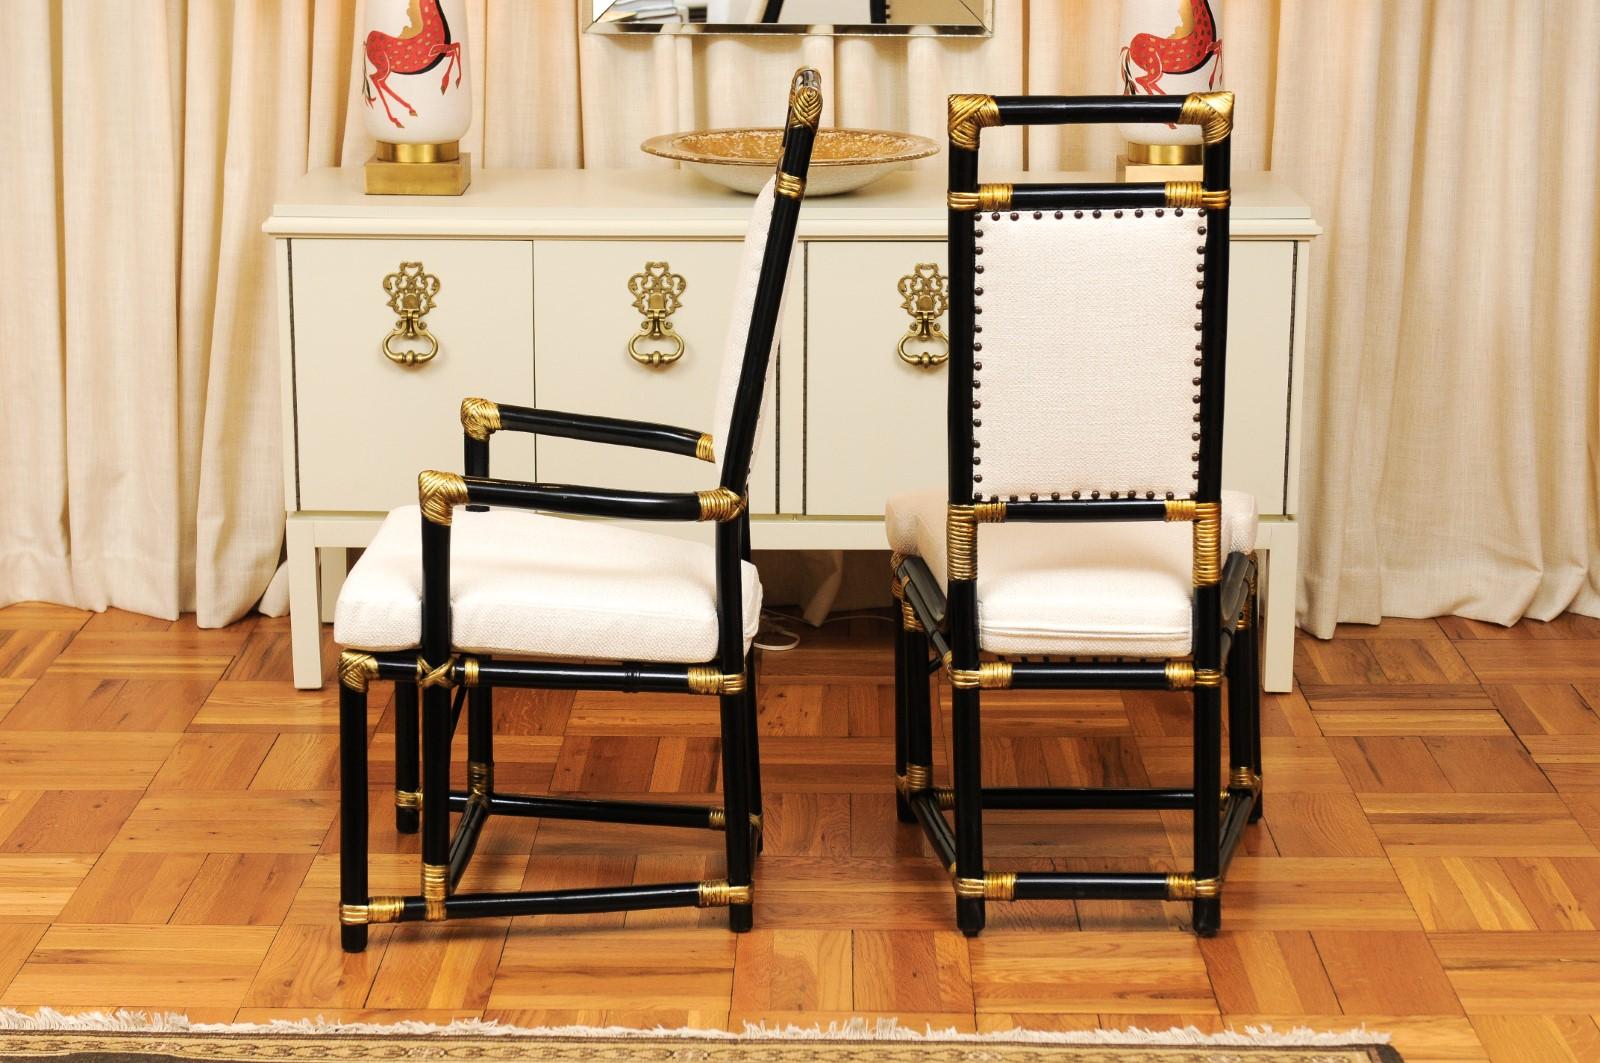 Regal Set of 12 Egyptian Revival Throne Dining Chairs by Henry Olko, circa 1955 For Sale 2